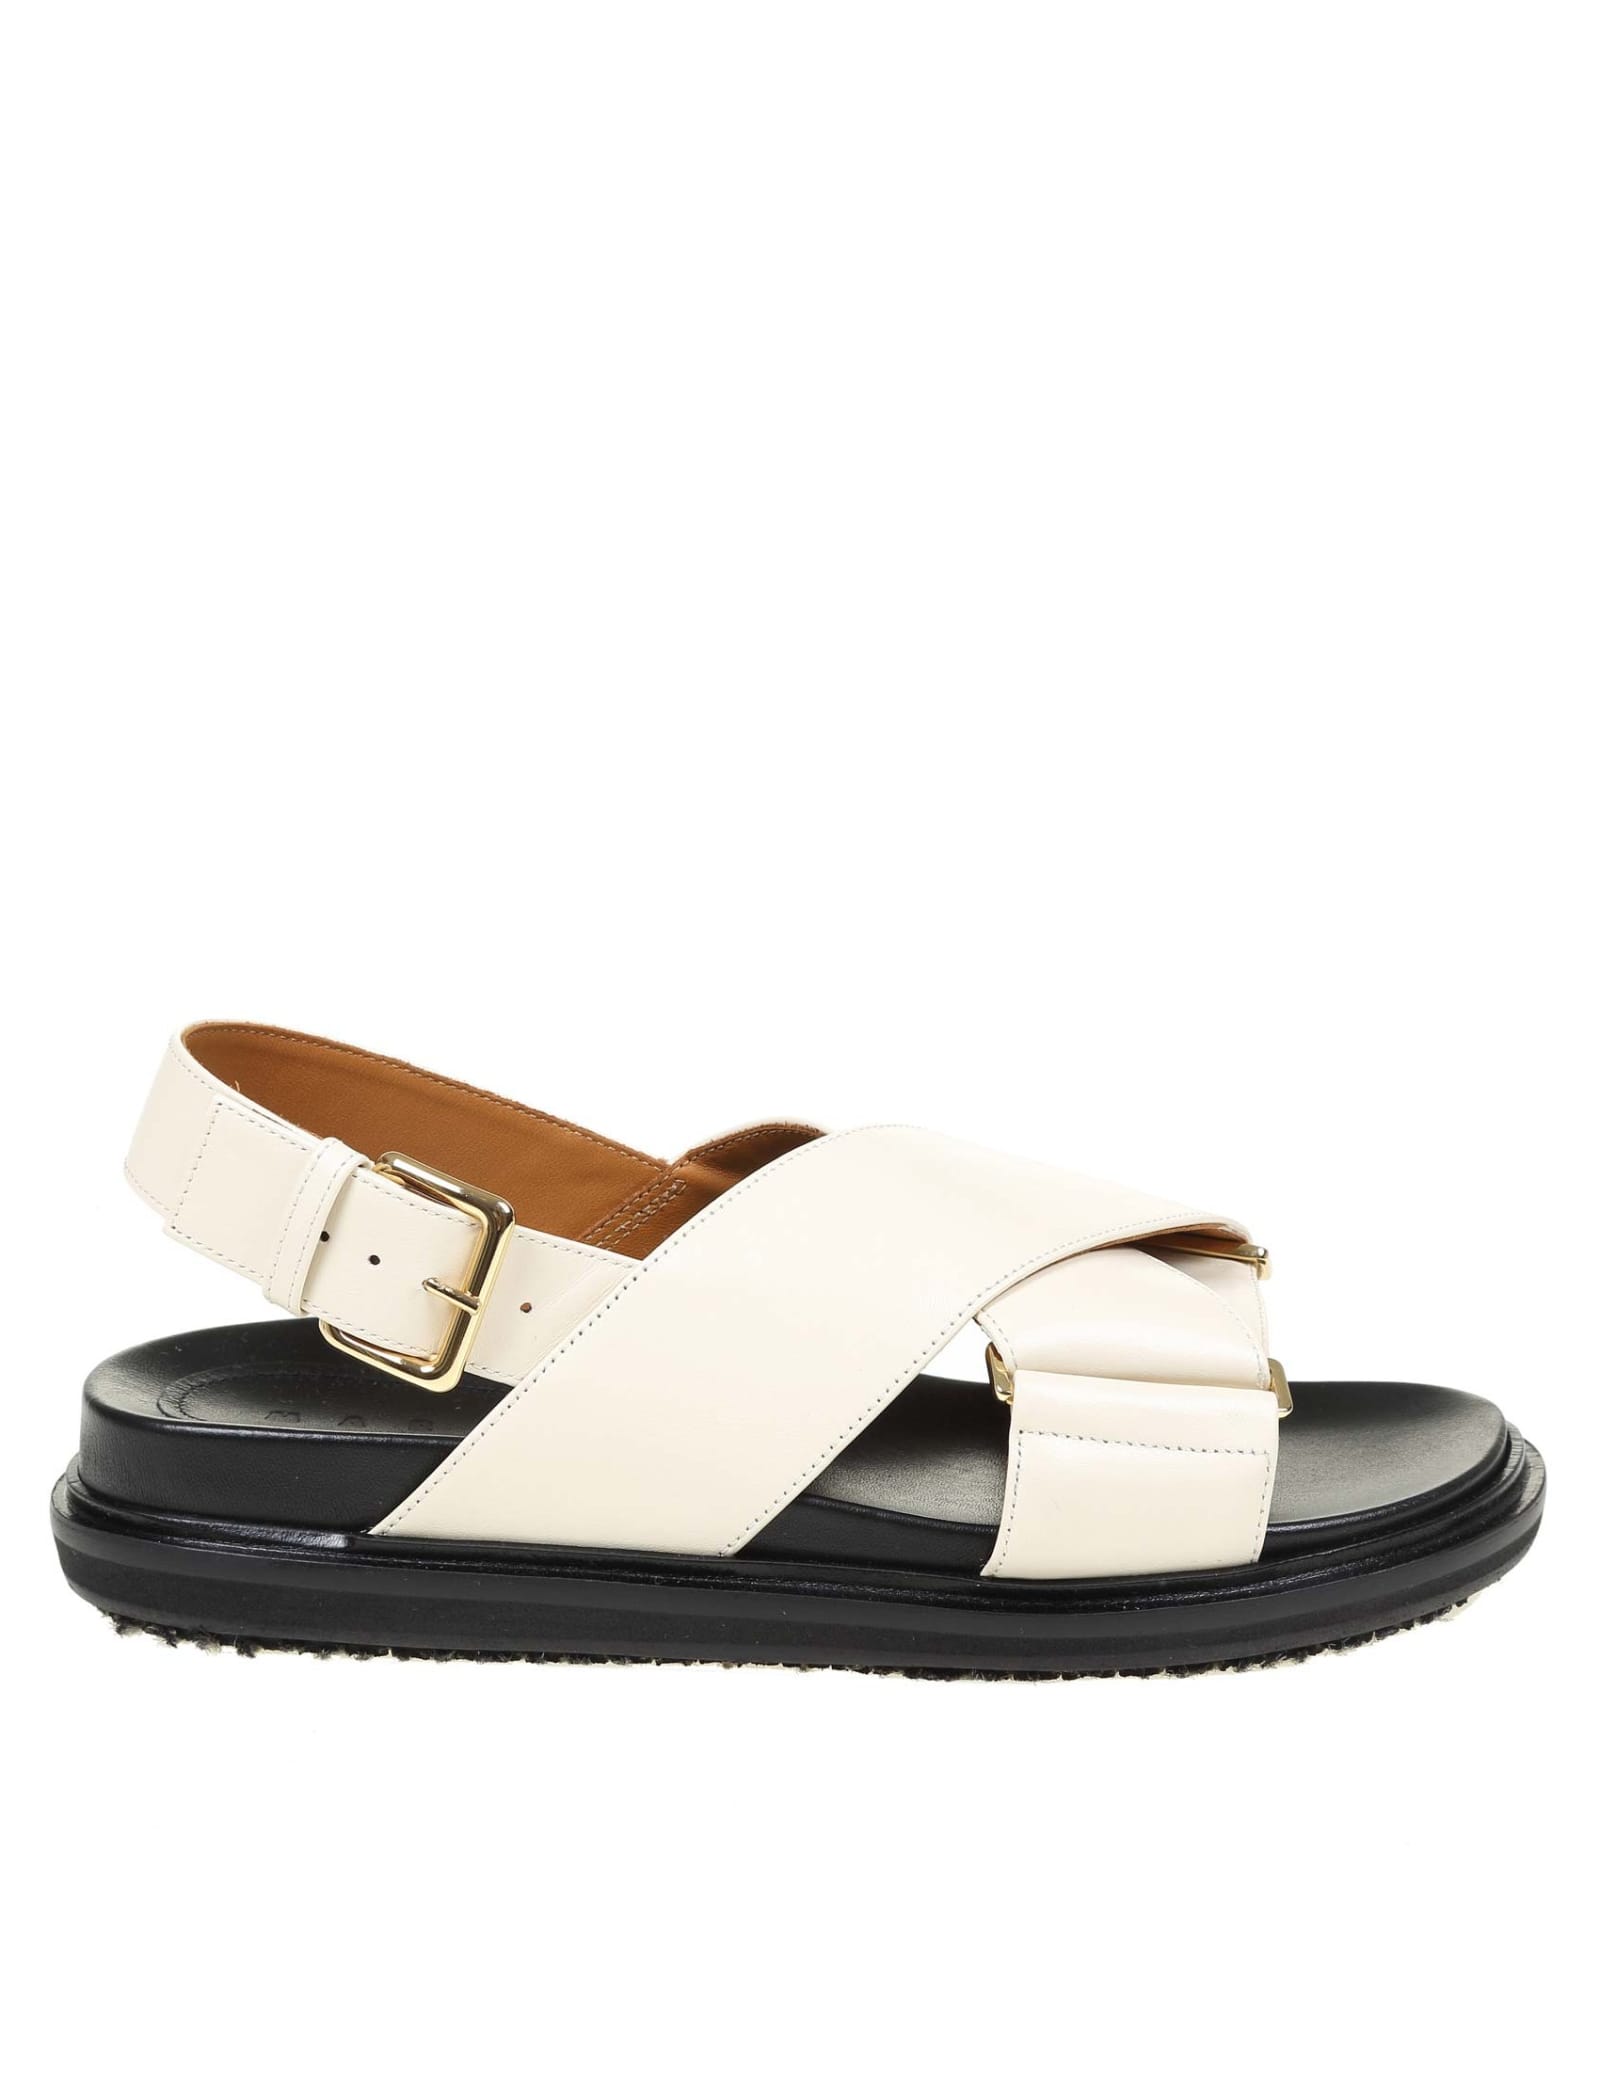 Buy Marni Fussbett Sandal In White Leather online, shop Marni shoes with free shipping